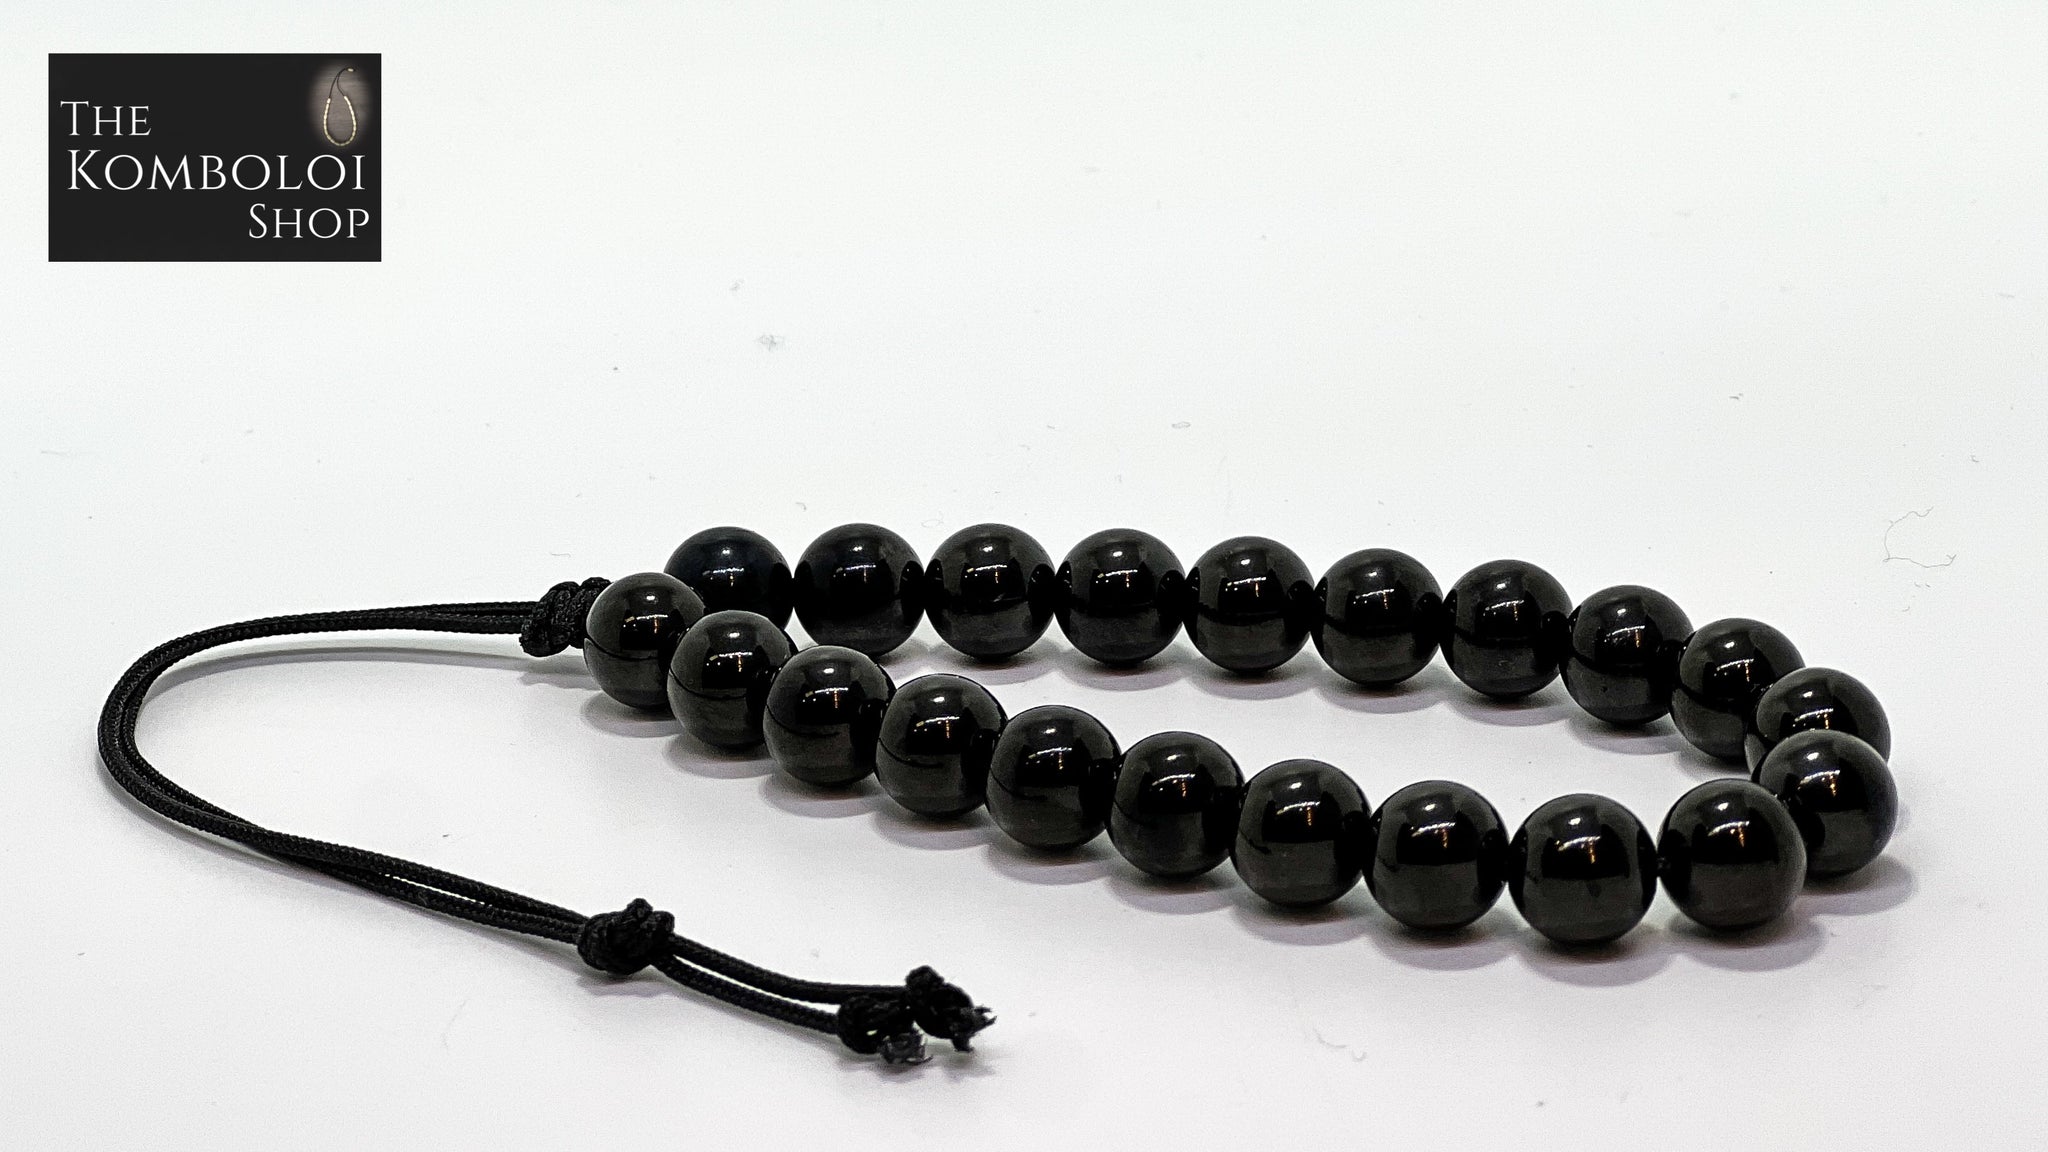 Stainless Steel Worry Beads - Xtreme Series - Wearable MK3 (Long)